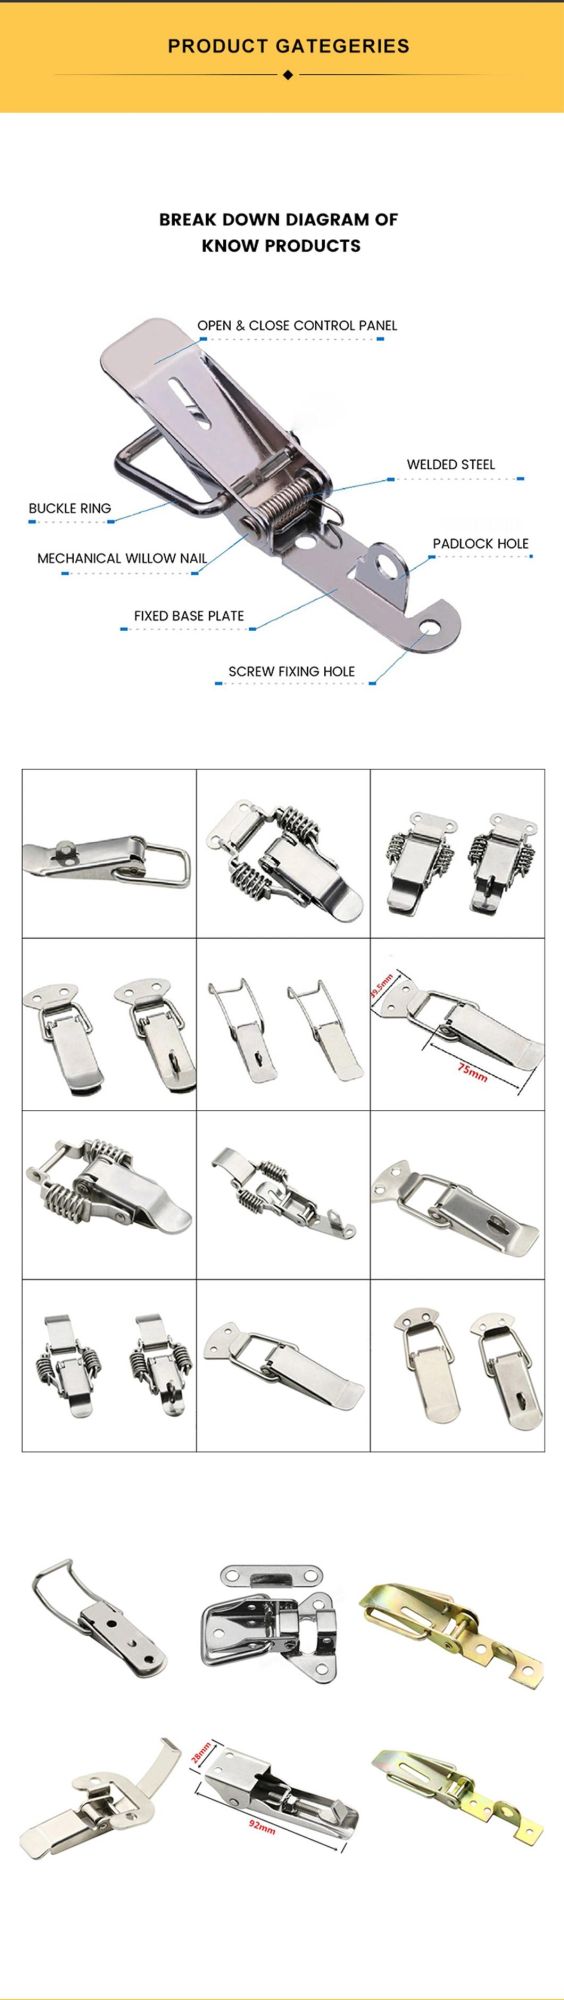 Antechamber Glove Box Lock Spring Load Toggle Latch Hook 40341s Antislip Red Horizontal Clamp Quick Release Toggle Latch